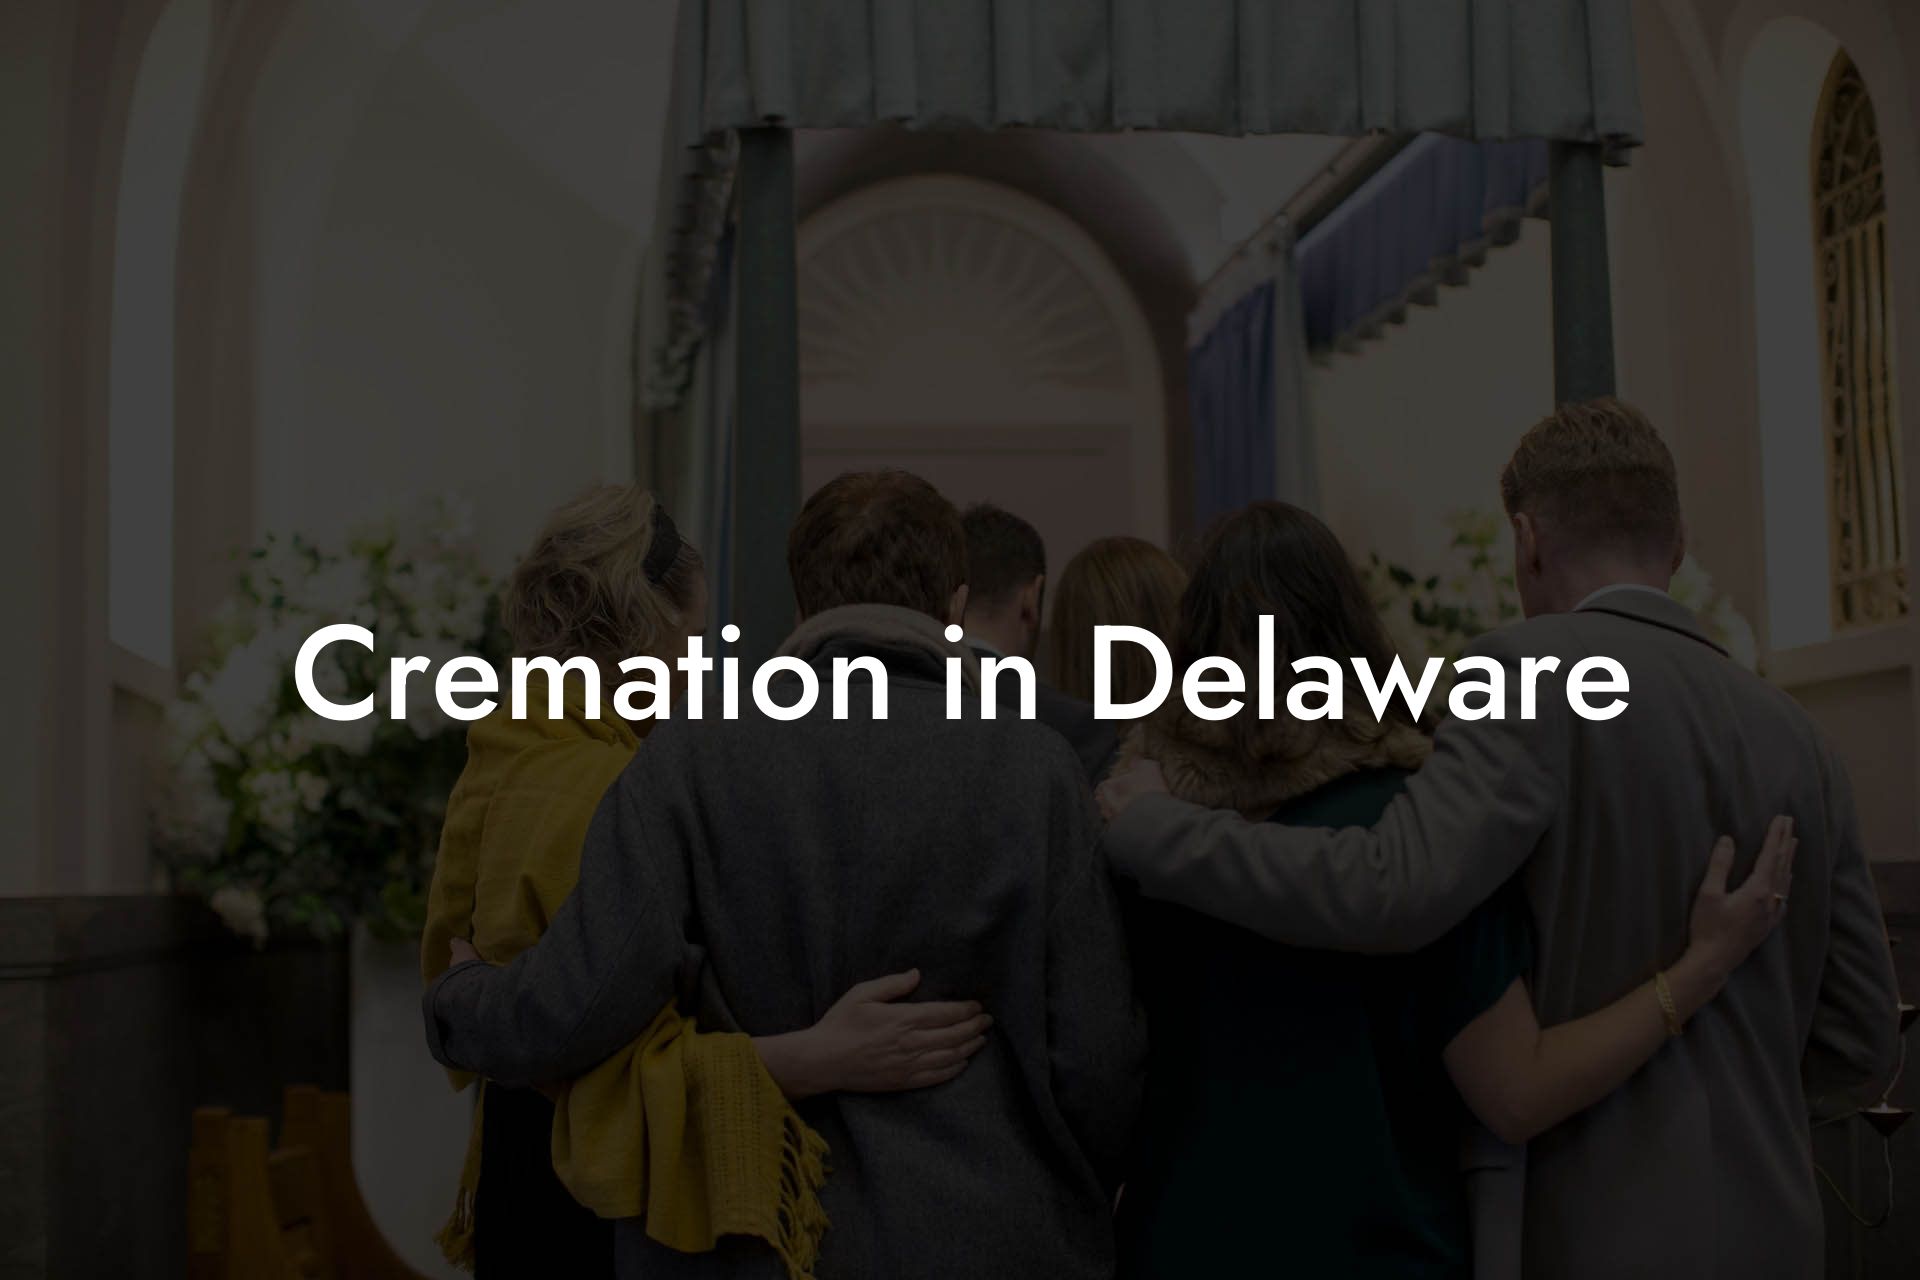 Cremation in Delaware